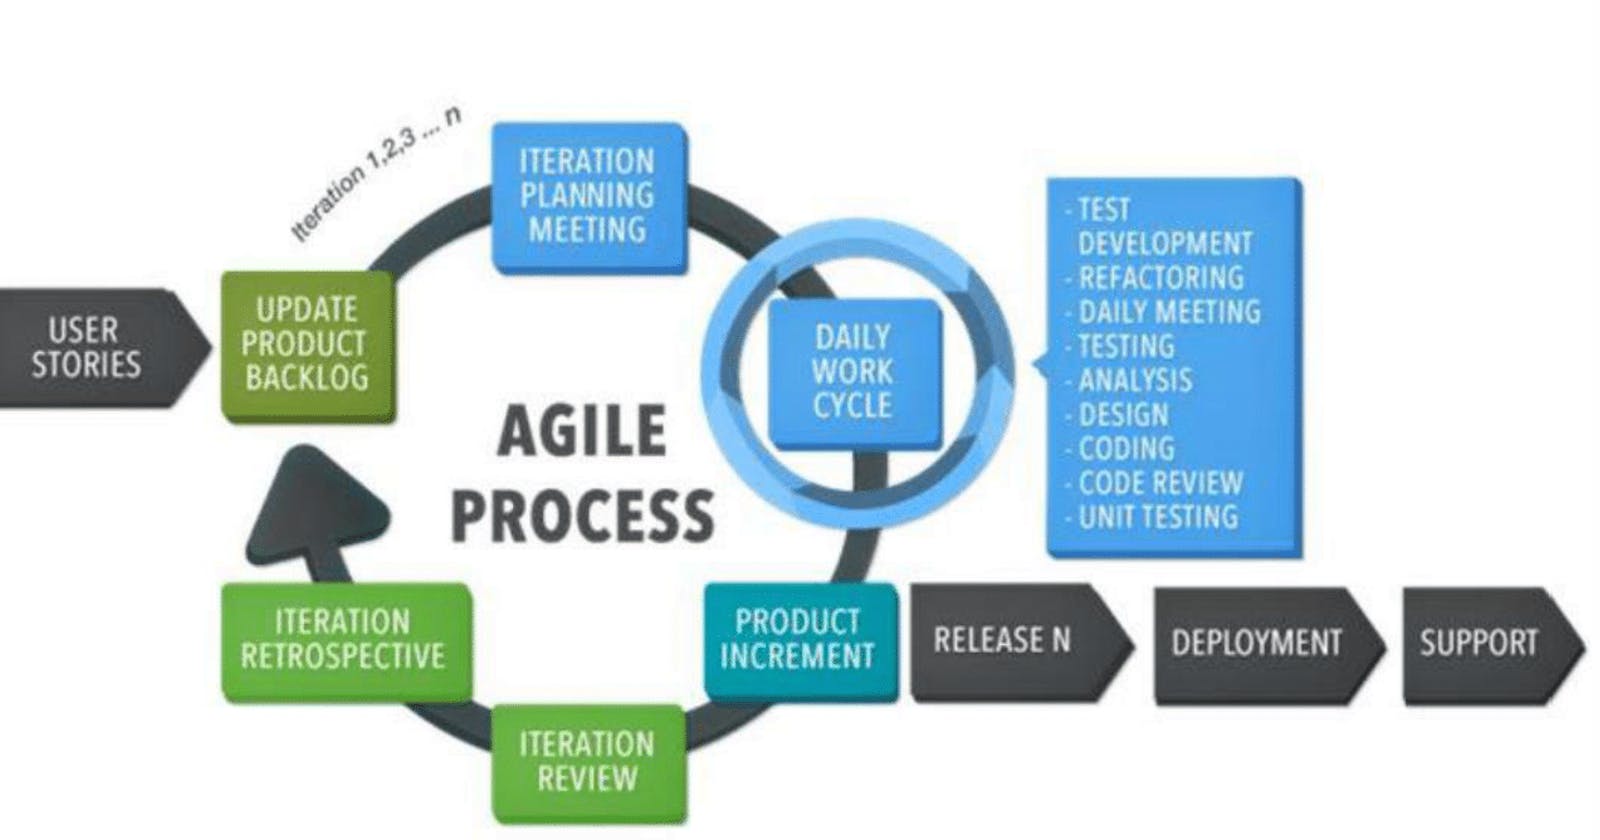 AgileScrum-Blog#06 Is Scaled Agile Framework(SAFe) Push or Pull or Both or Neither?